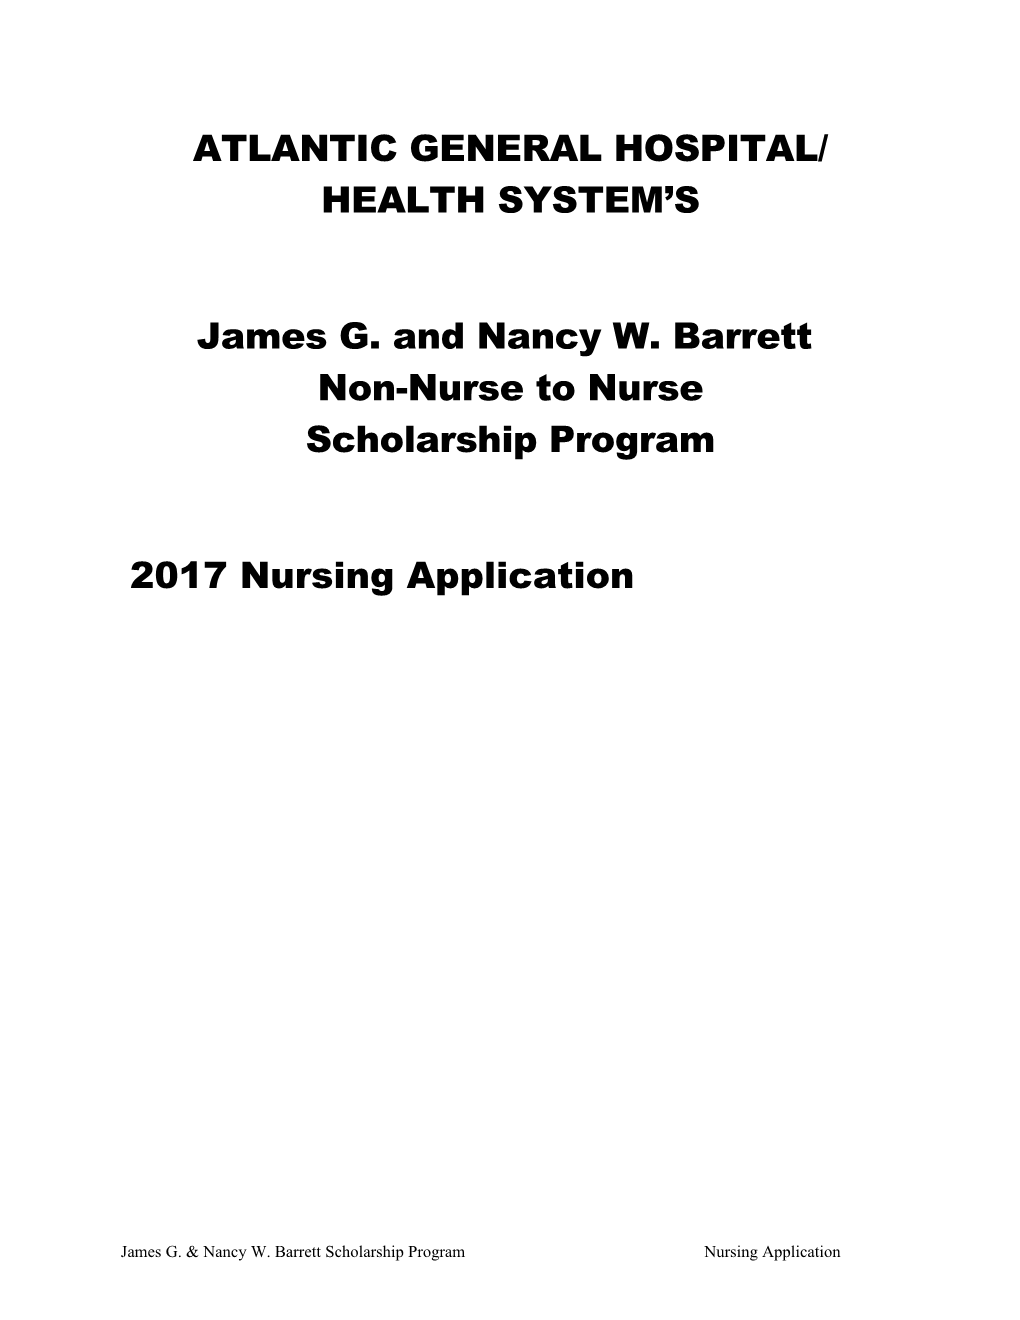 Directions for Completing the Application to Nursing